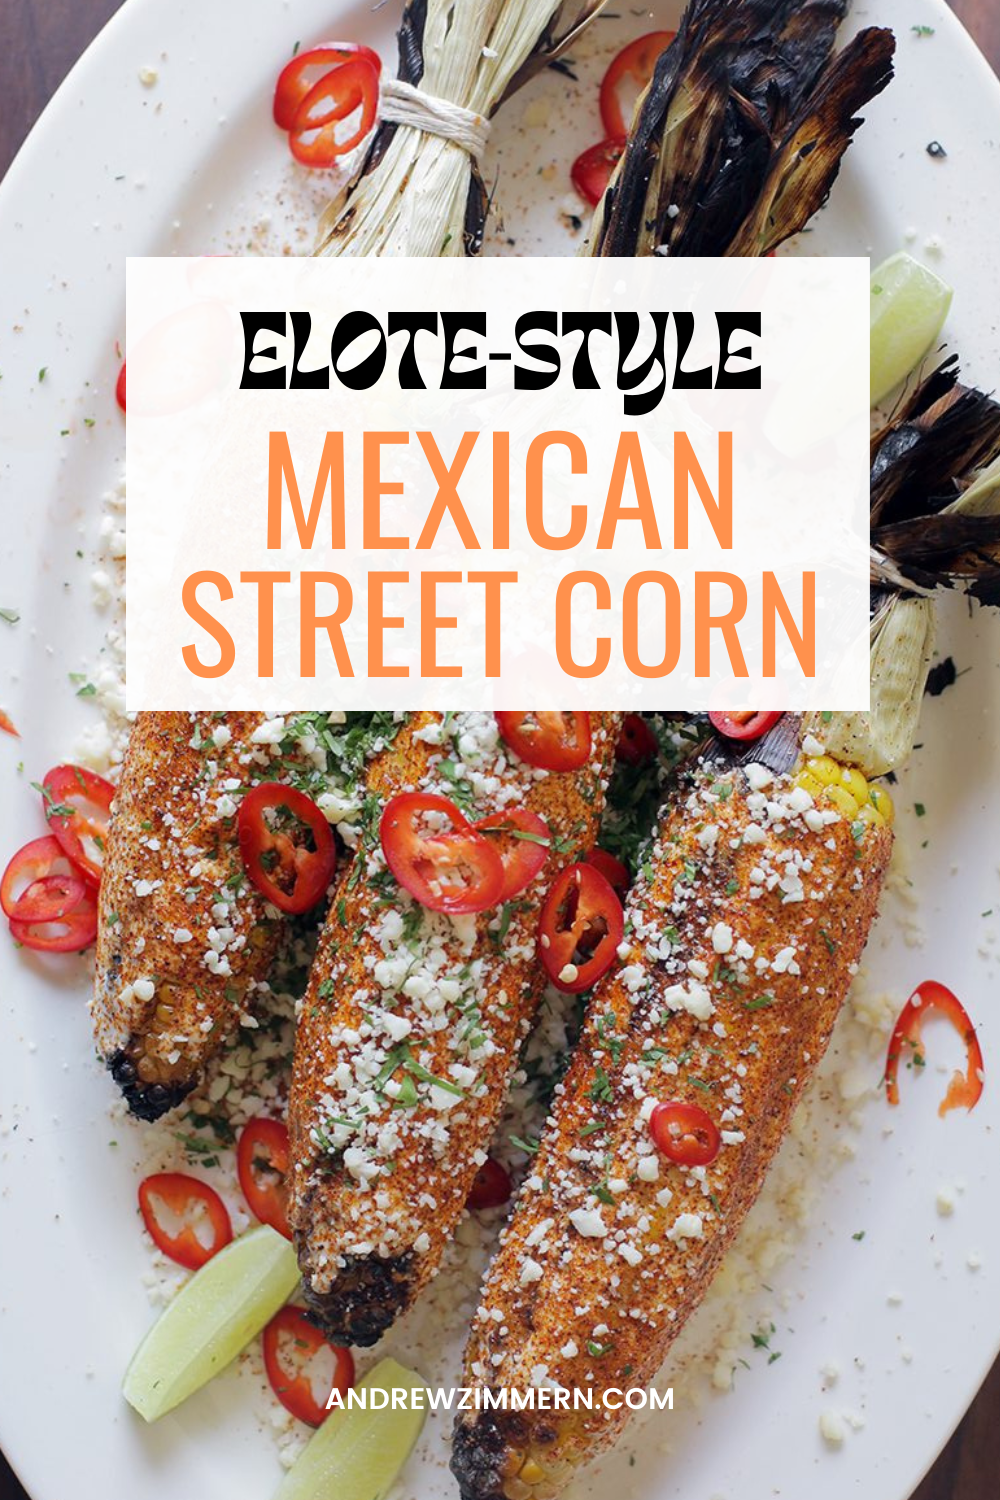 The best way to cook corn on the cob is in the husk directly on the coals. The husk protects the cob from incinerating, while the embers impart a smoky, fire charred flavor. Smother the sweet corn with classic elote toppings—crema, mayo, cilantro and my new Mexican Fiesta seasoning.